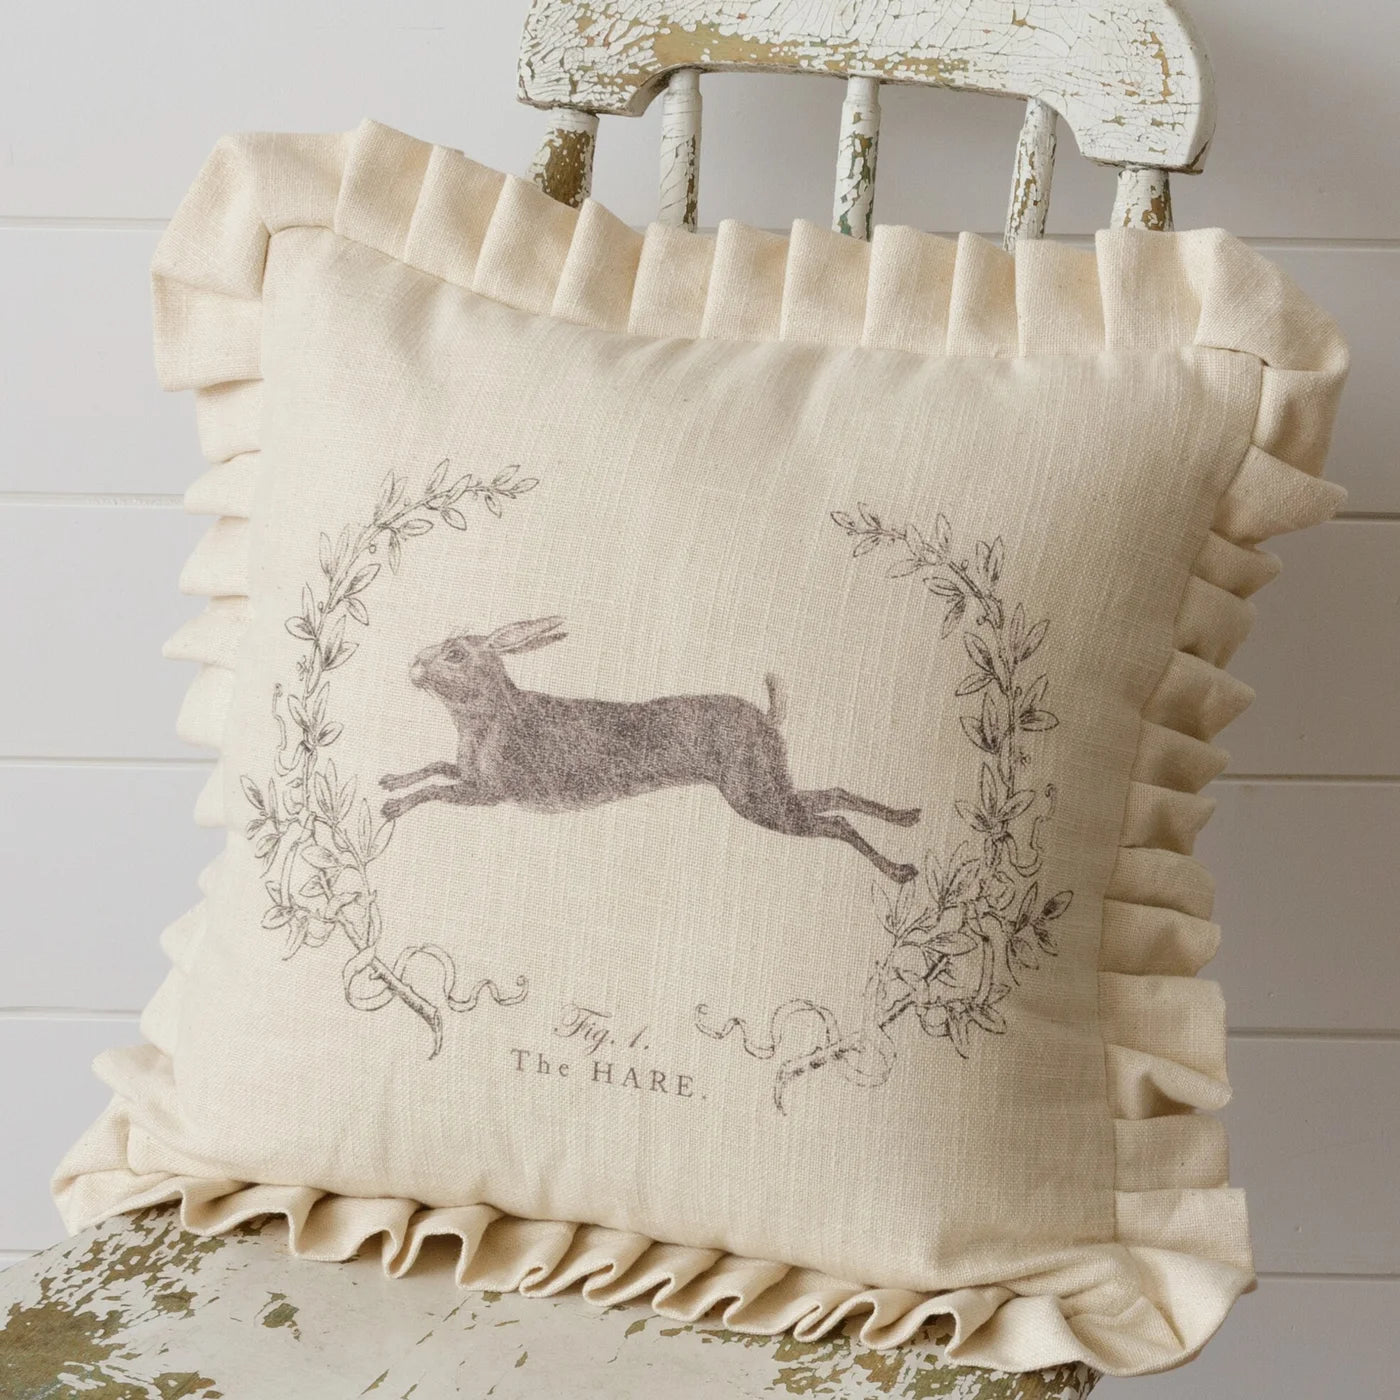 Leaping Rabbit Pillow with ruffle